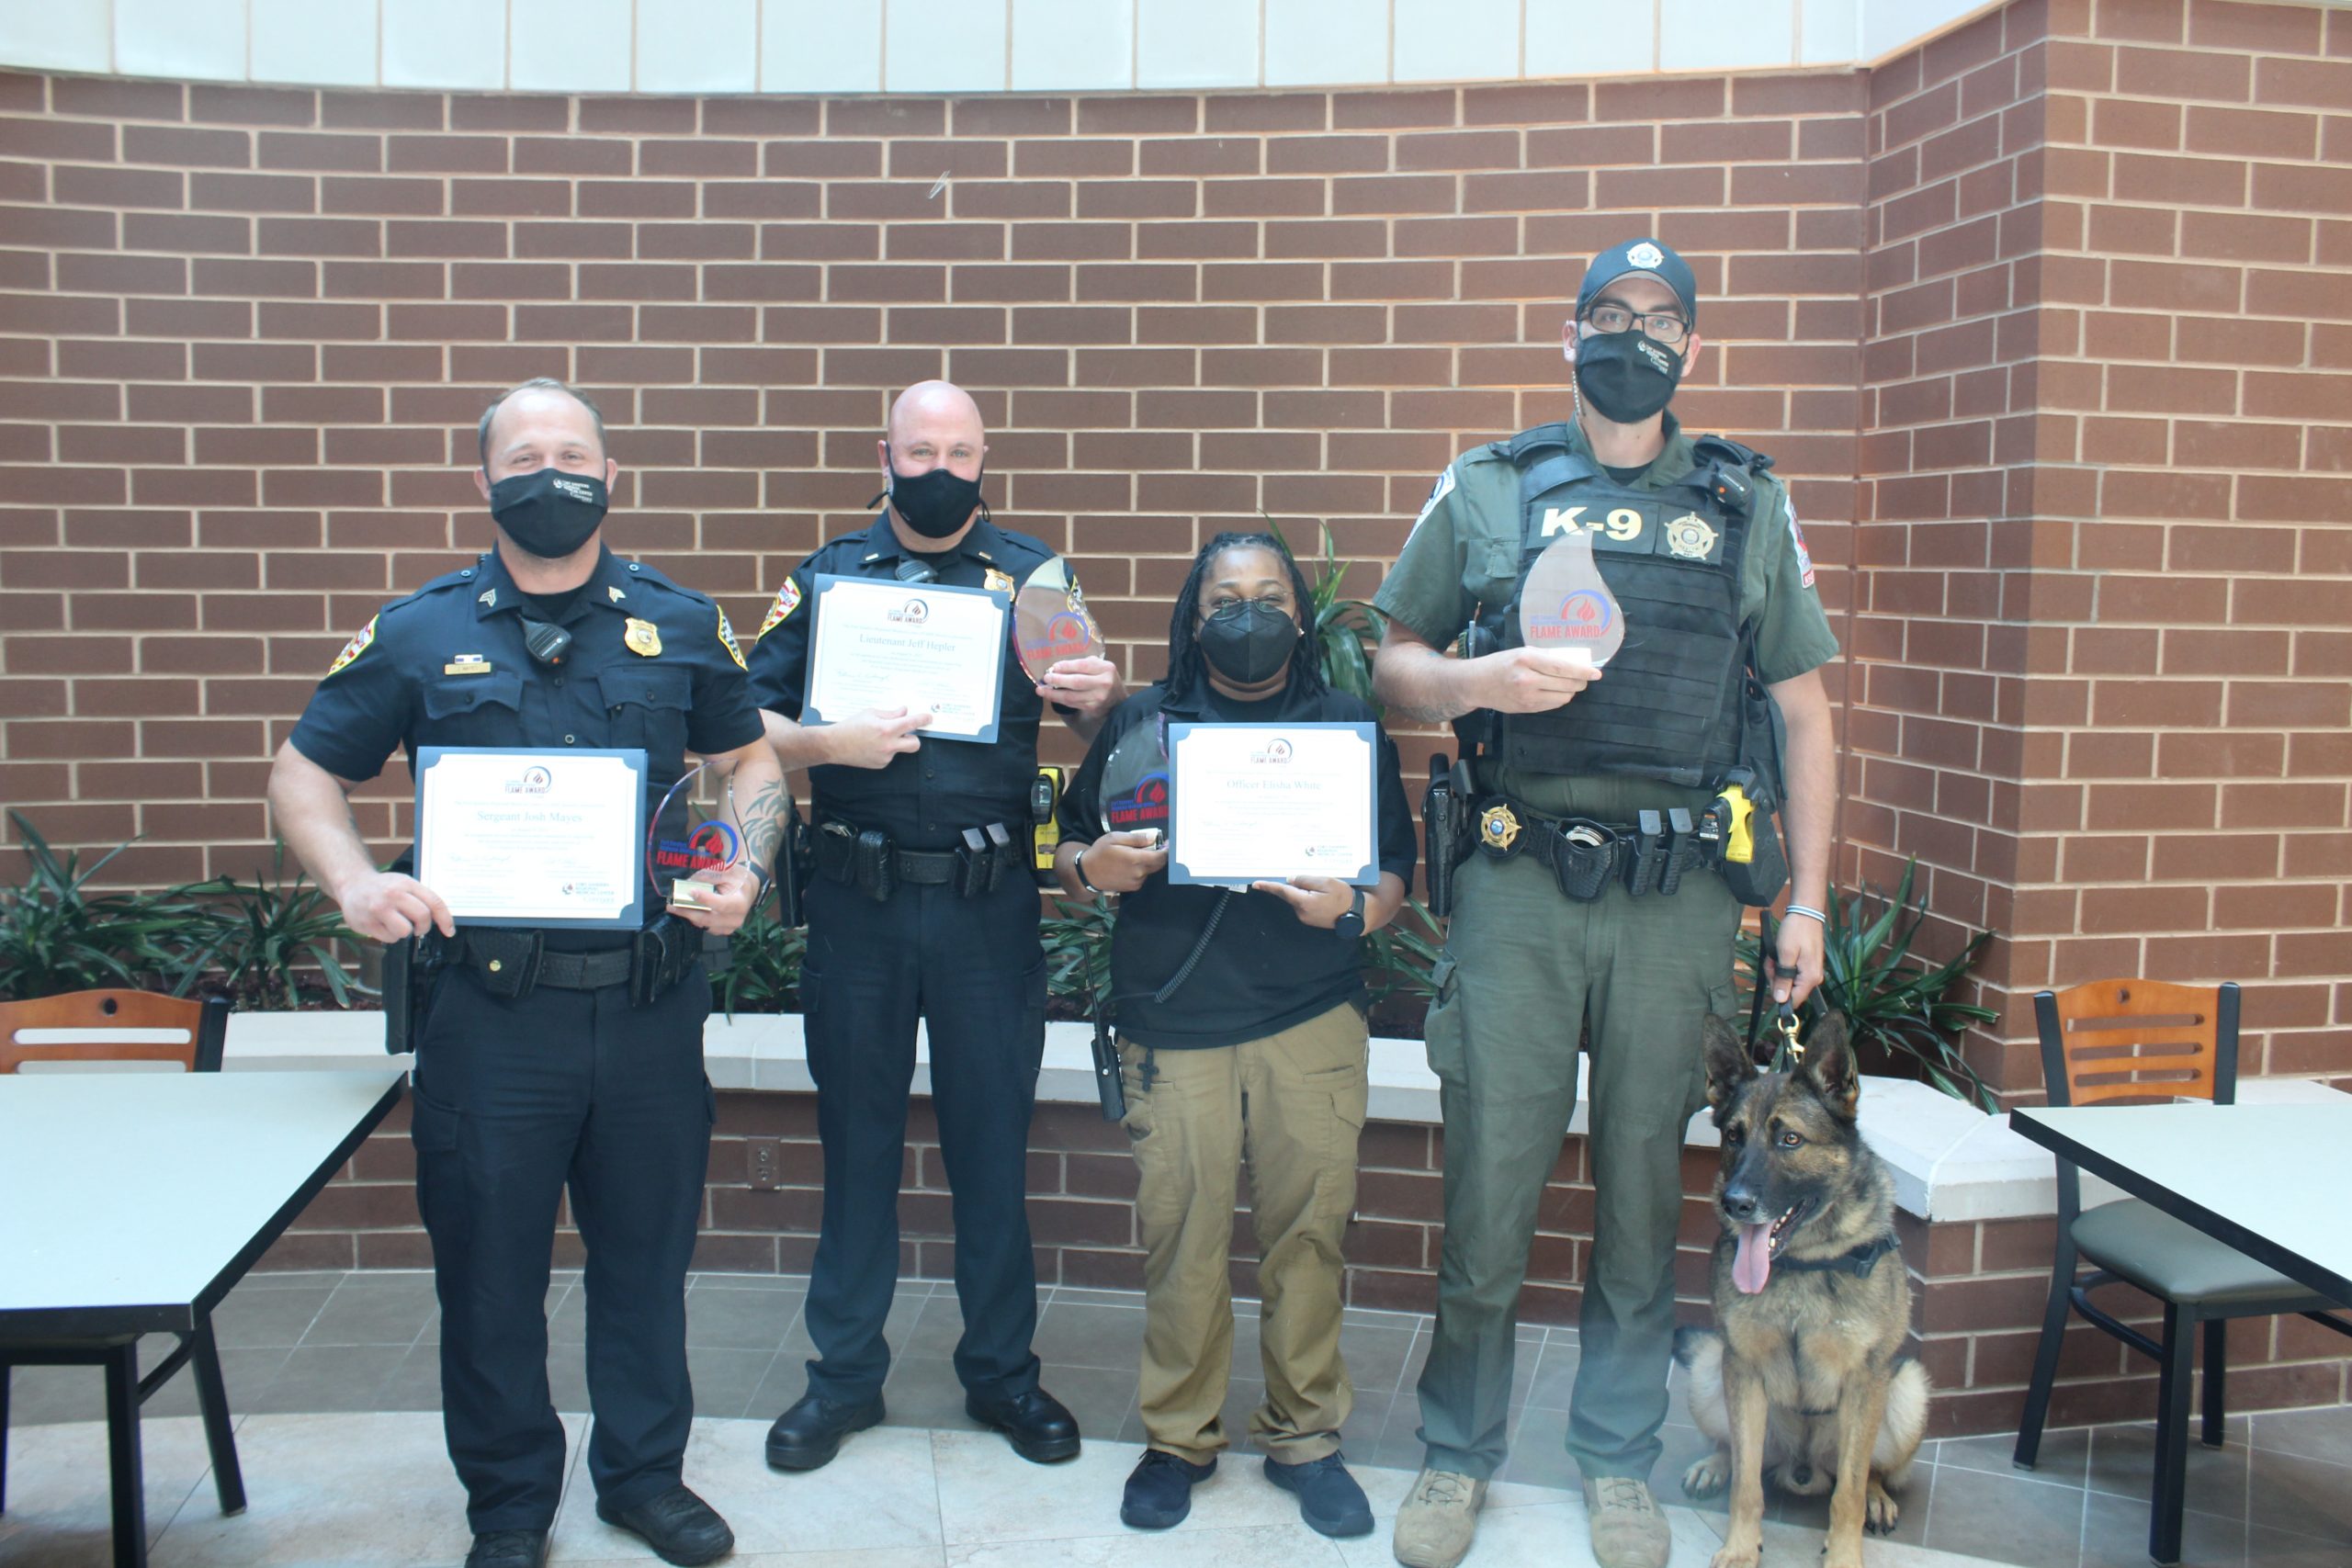 Security team receiving their FLAME awards